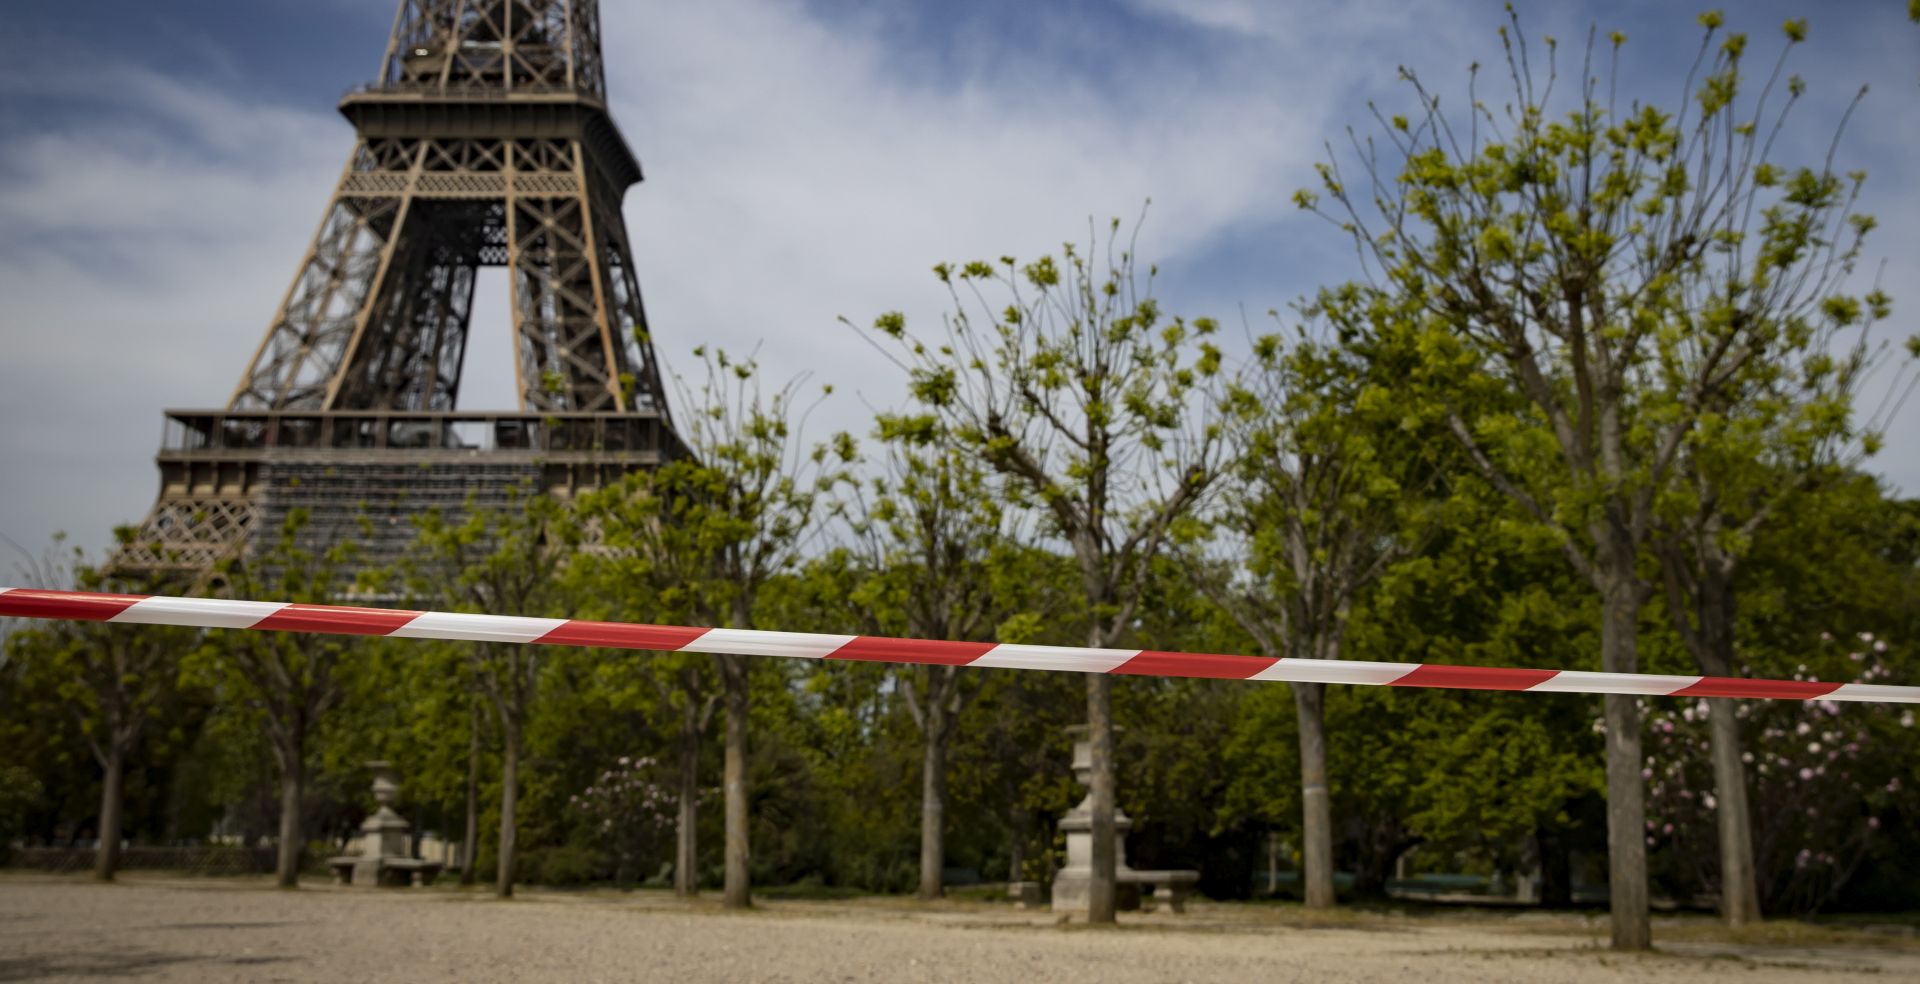 epa08375425 Police tape cordons off Champs de Mars parc near Eiffel Tower in Paris, France, 21 April 2020. France is under lockdown in an attempt to stop the widespread of the SARS-CoV-2 coronavirus causing the Covid-19 disease.  EPA/IAN LANGSDON